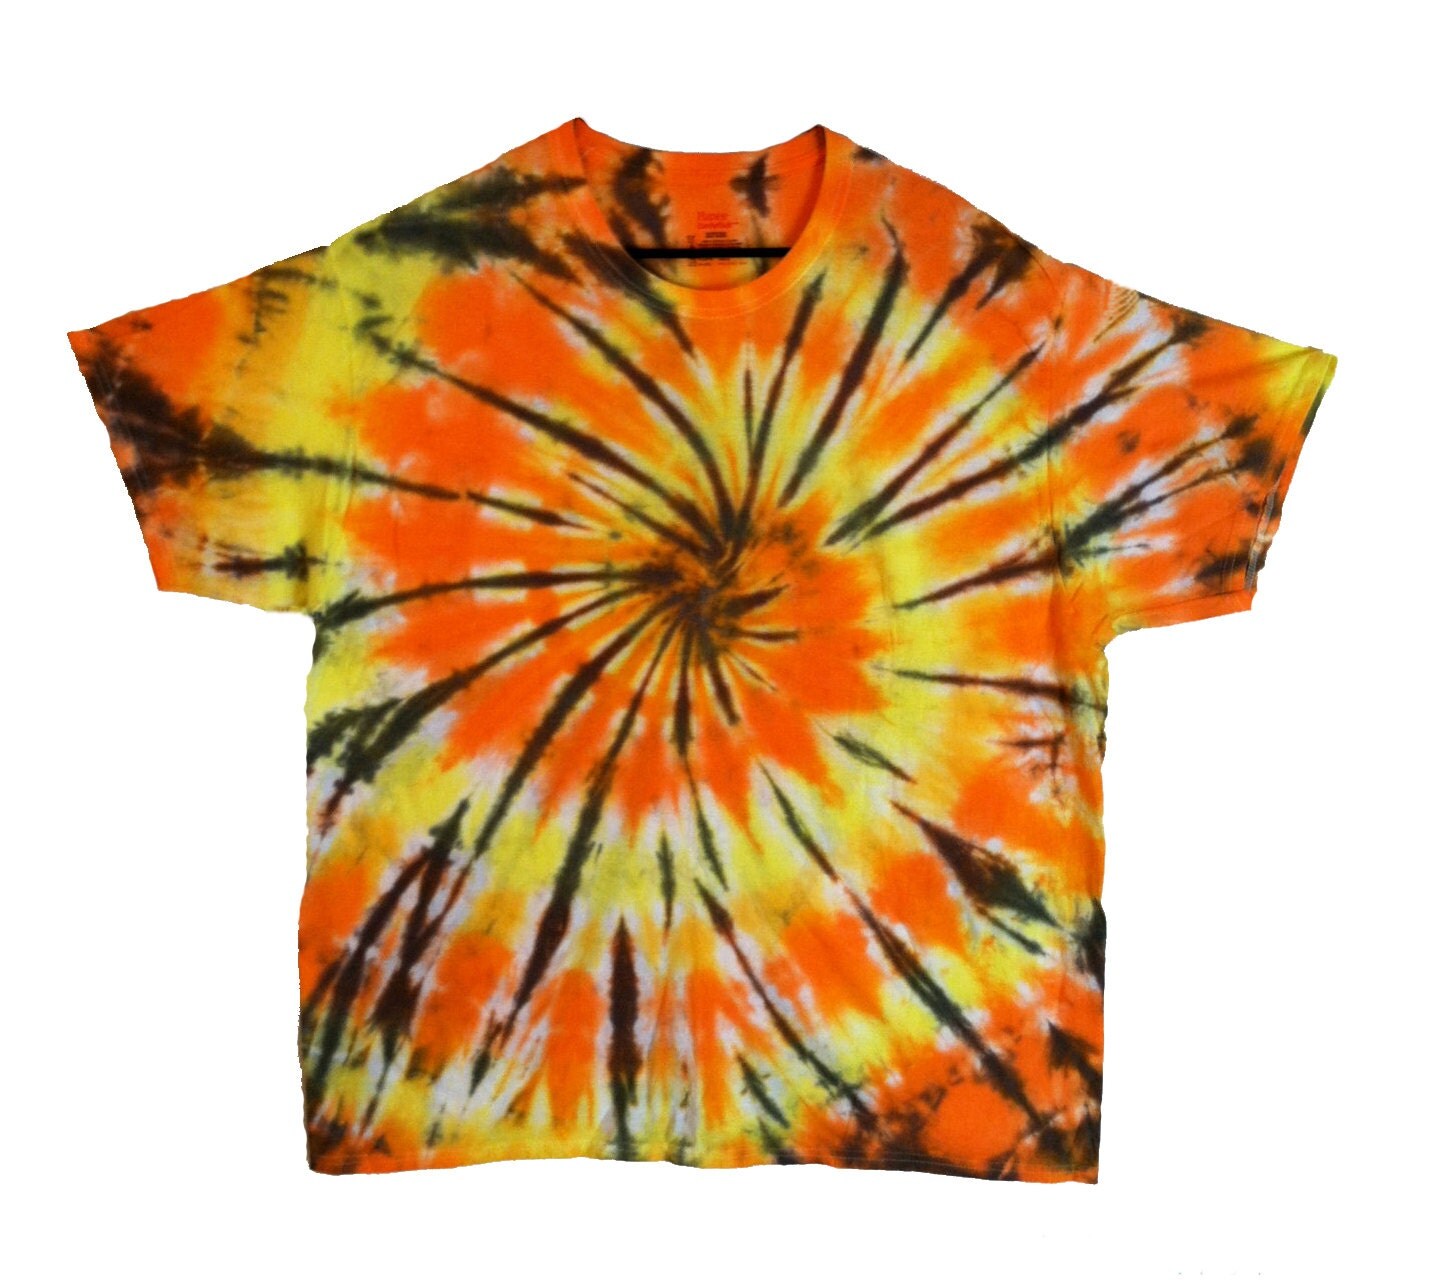 Tie Dye Shirt Yellow and Orange Spiral with Black Stripes